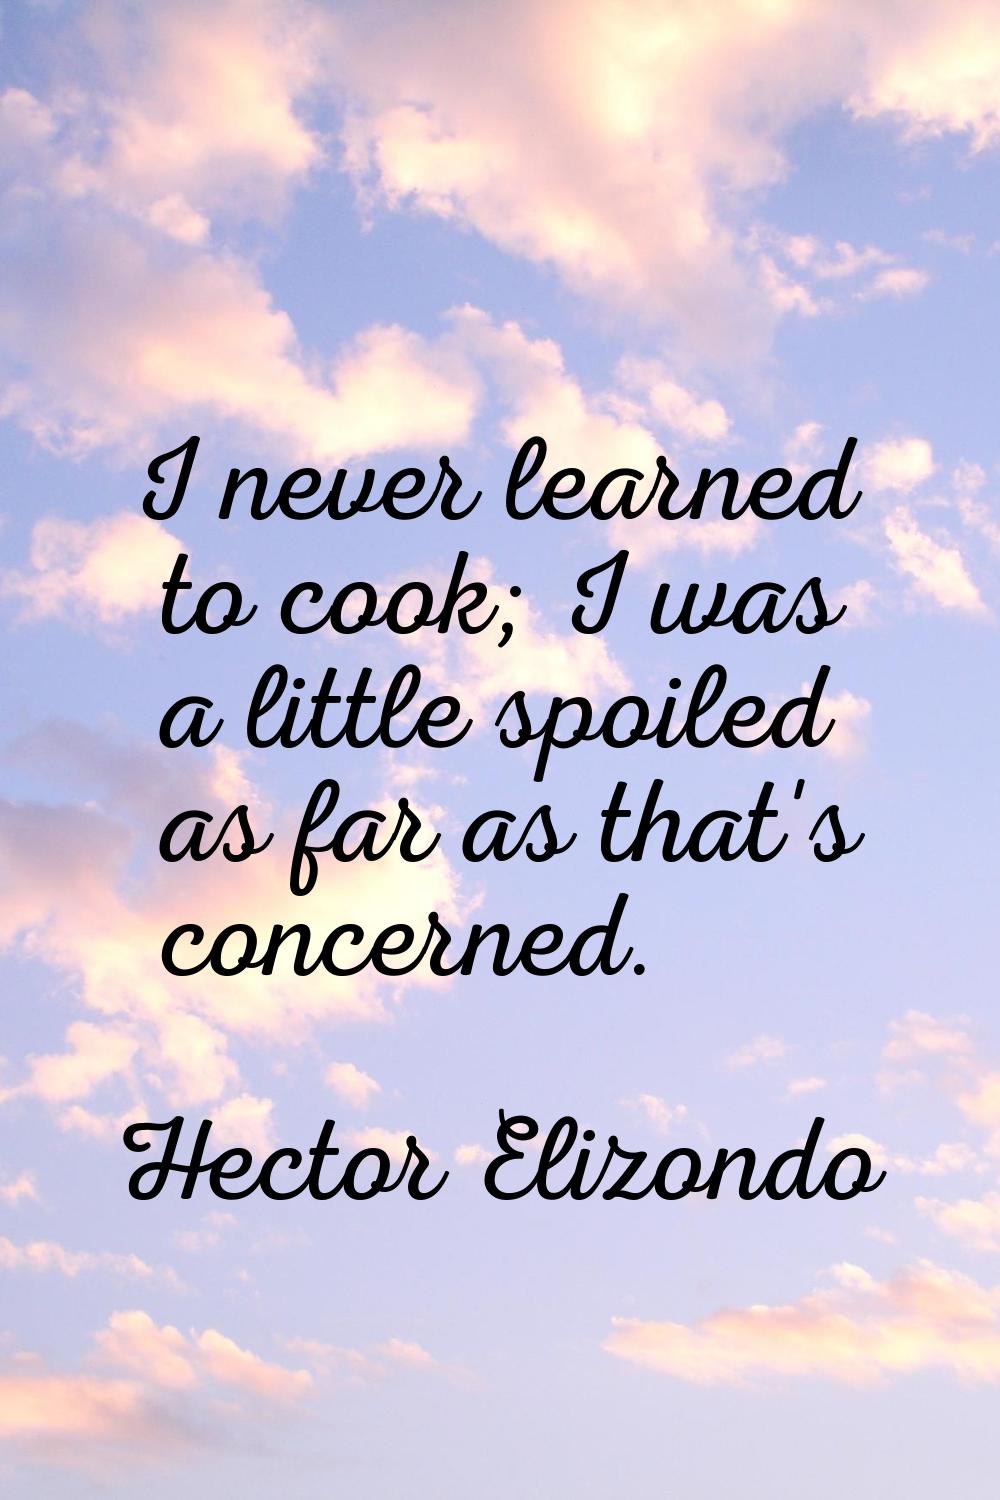 I never learned to cook; I was a little spoiled as far as that's concerned.